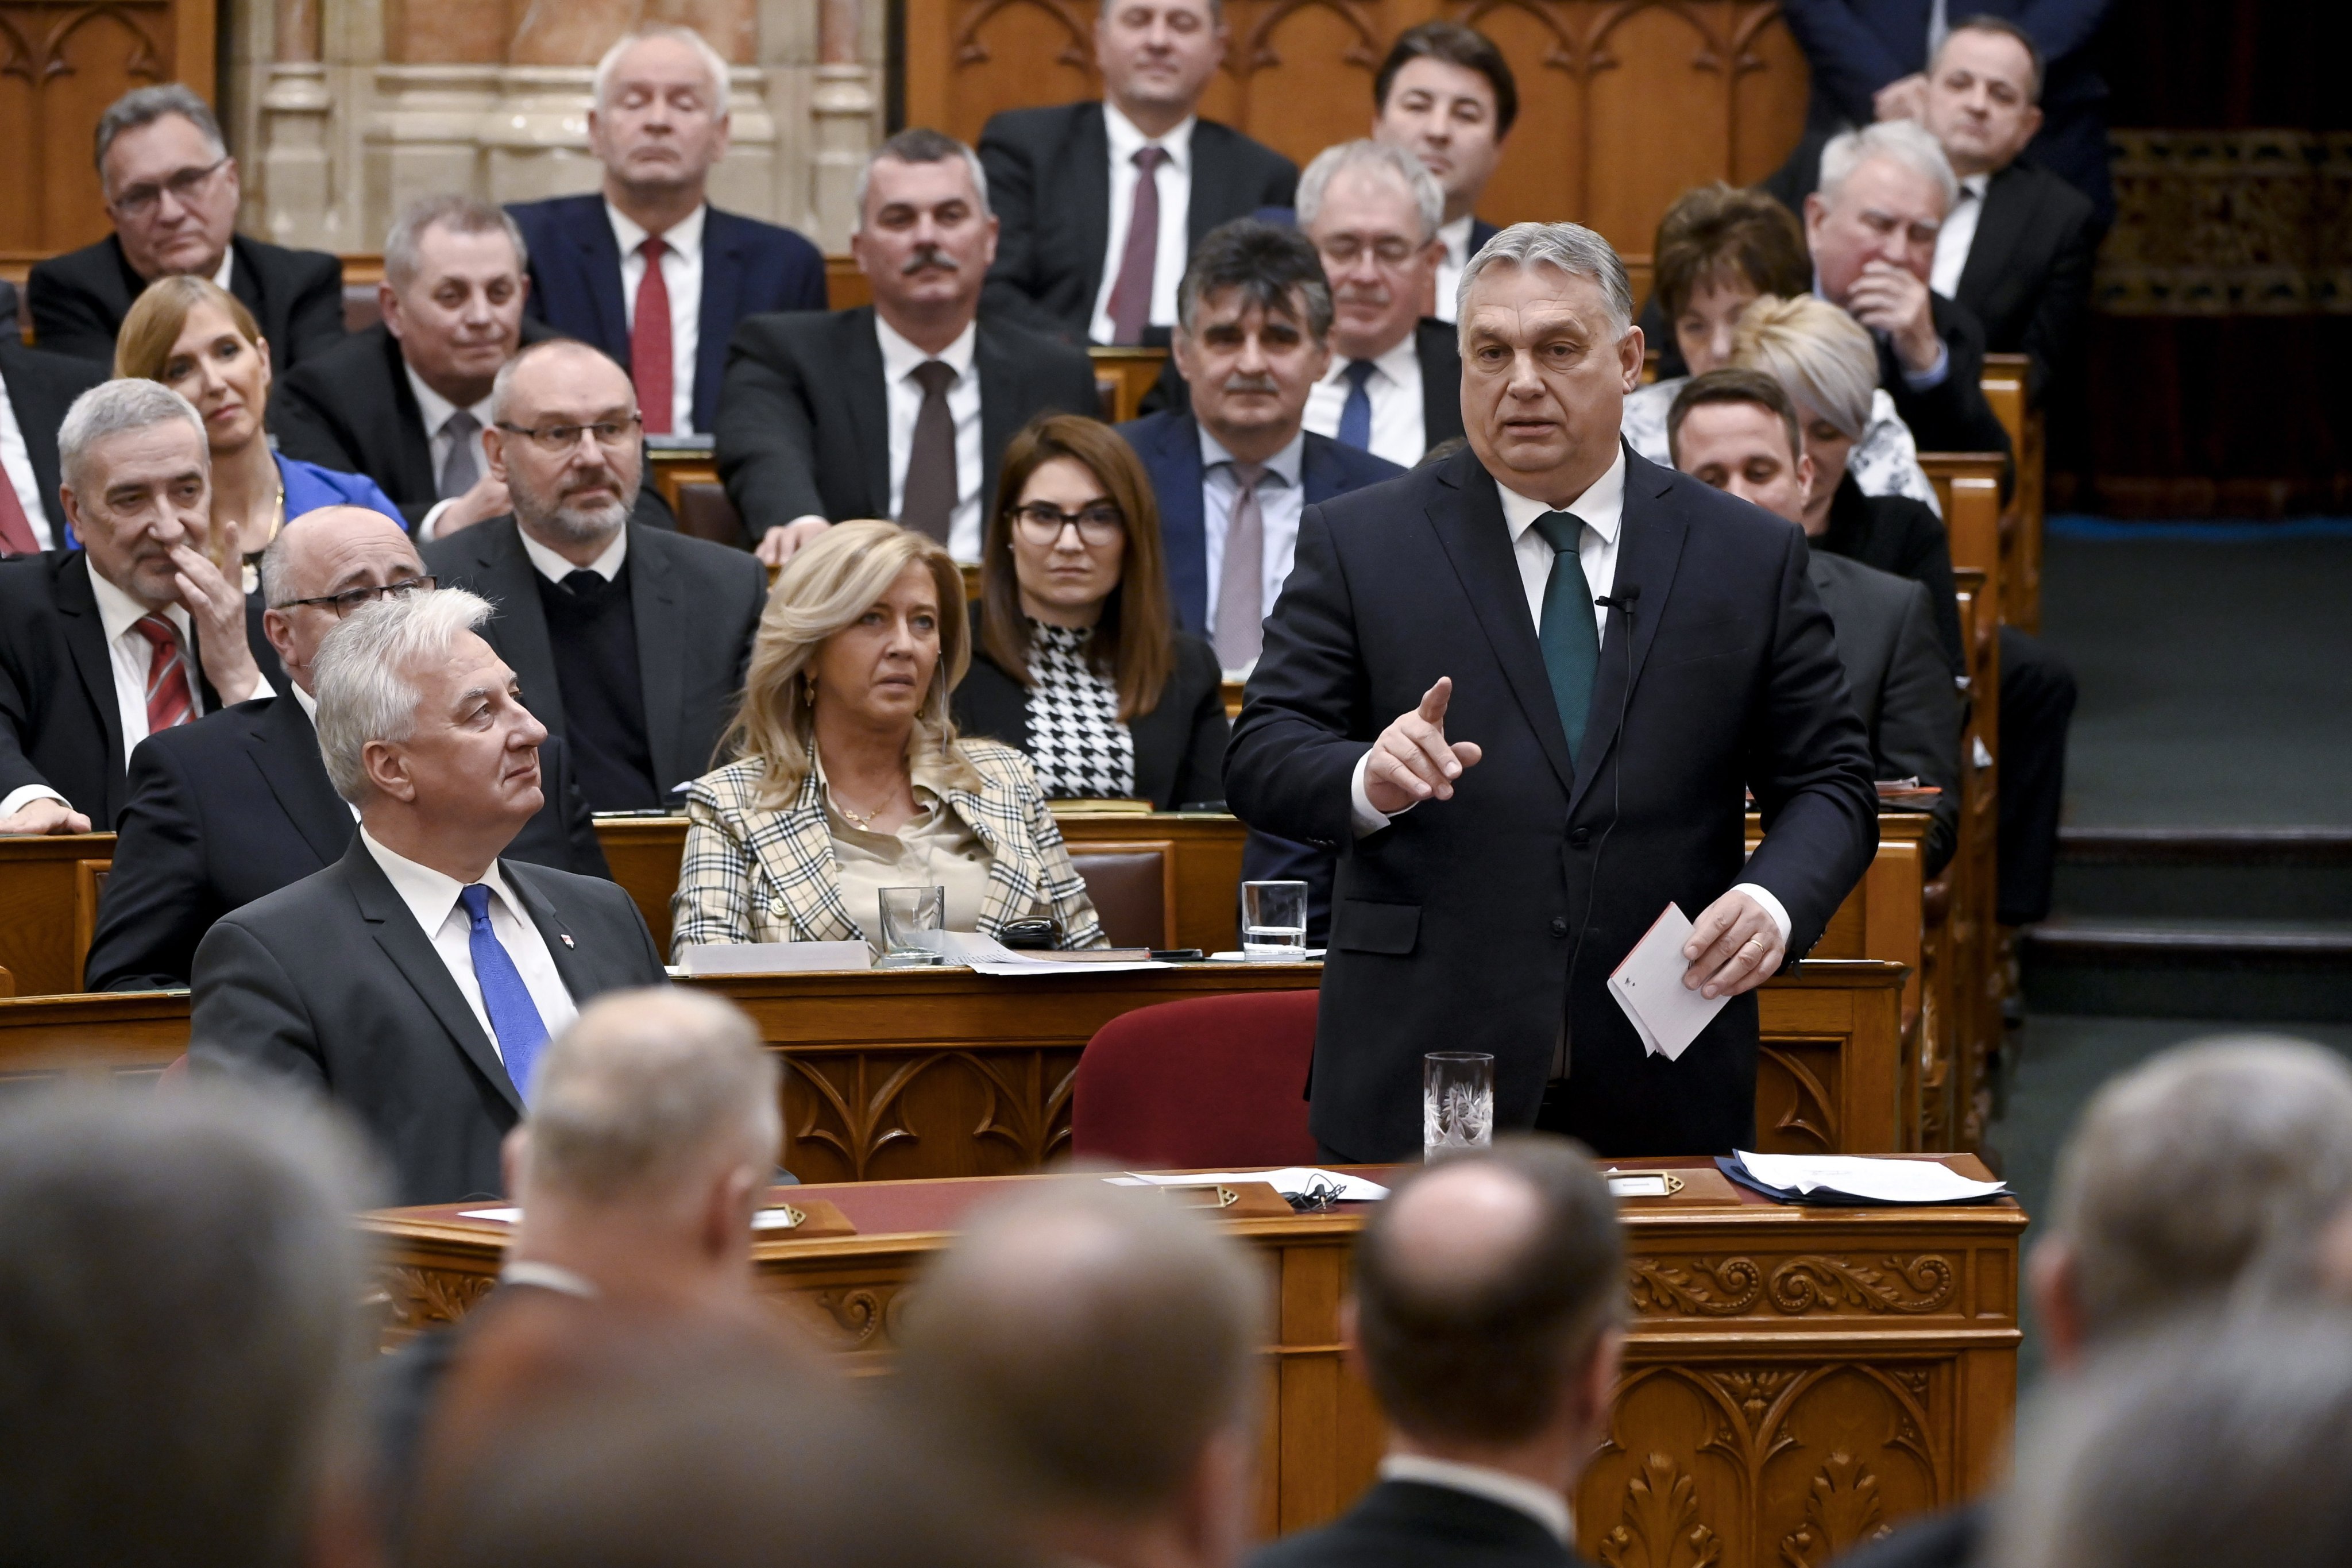 Hungarian Prime Minister Viktor Orban speaking during the opening day of the parliament’s spring session in Budapest on Monday. Photo: EPA-EFE